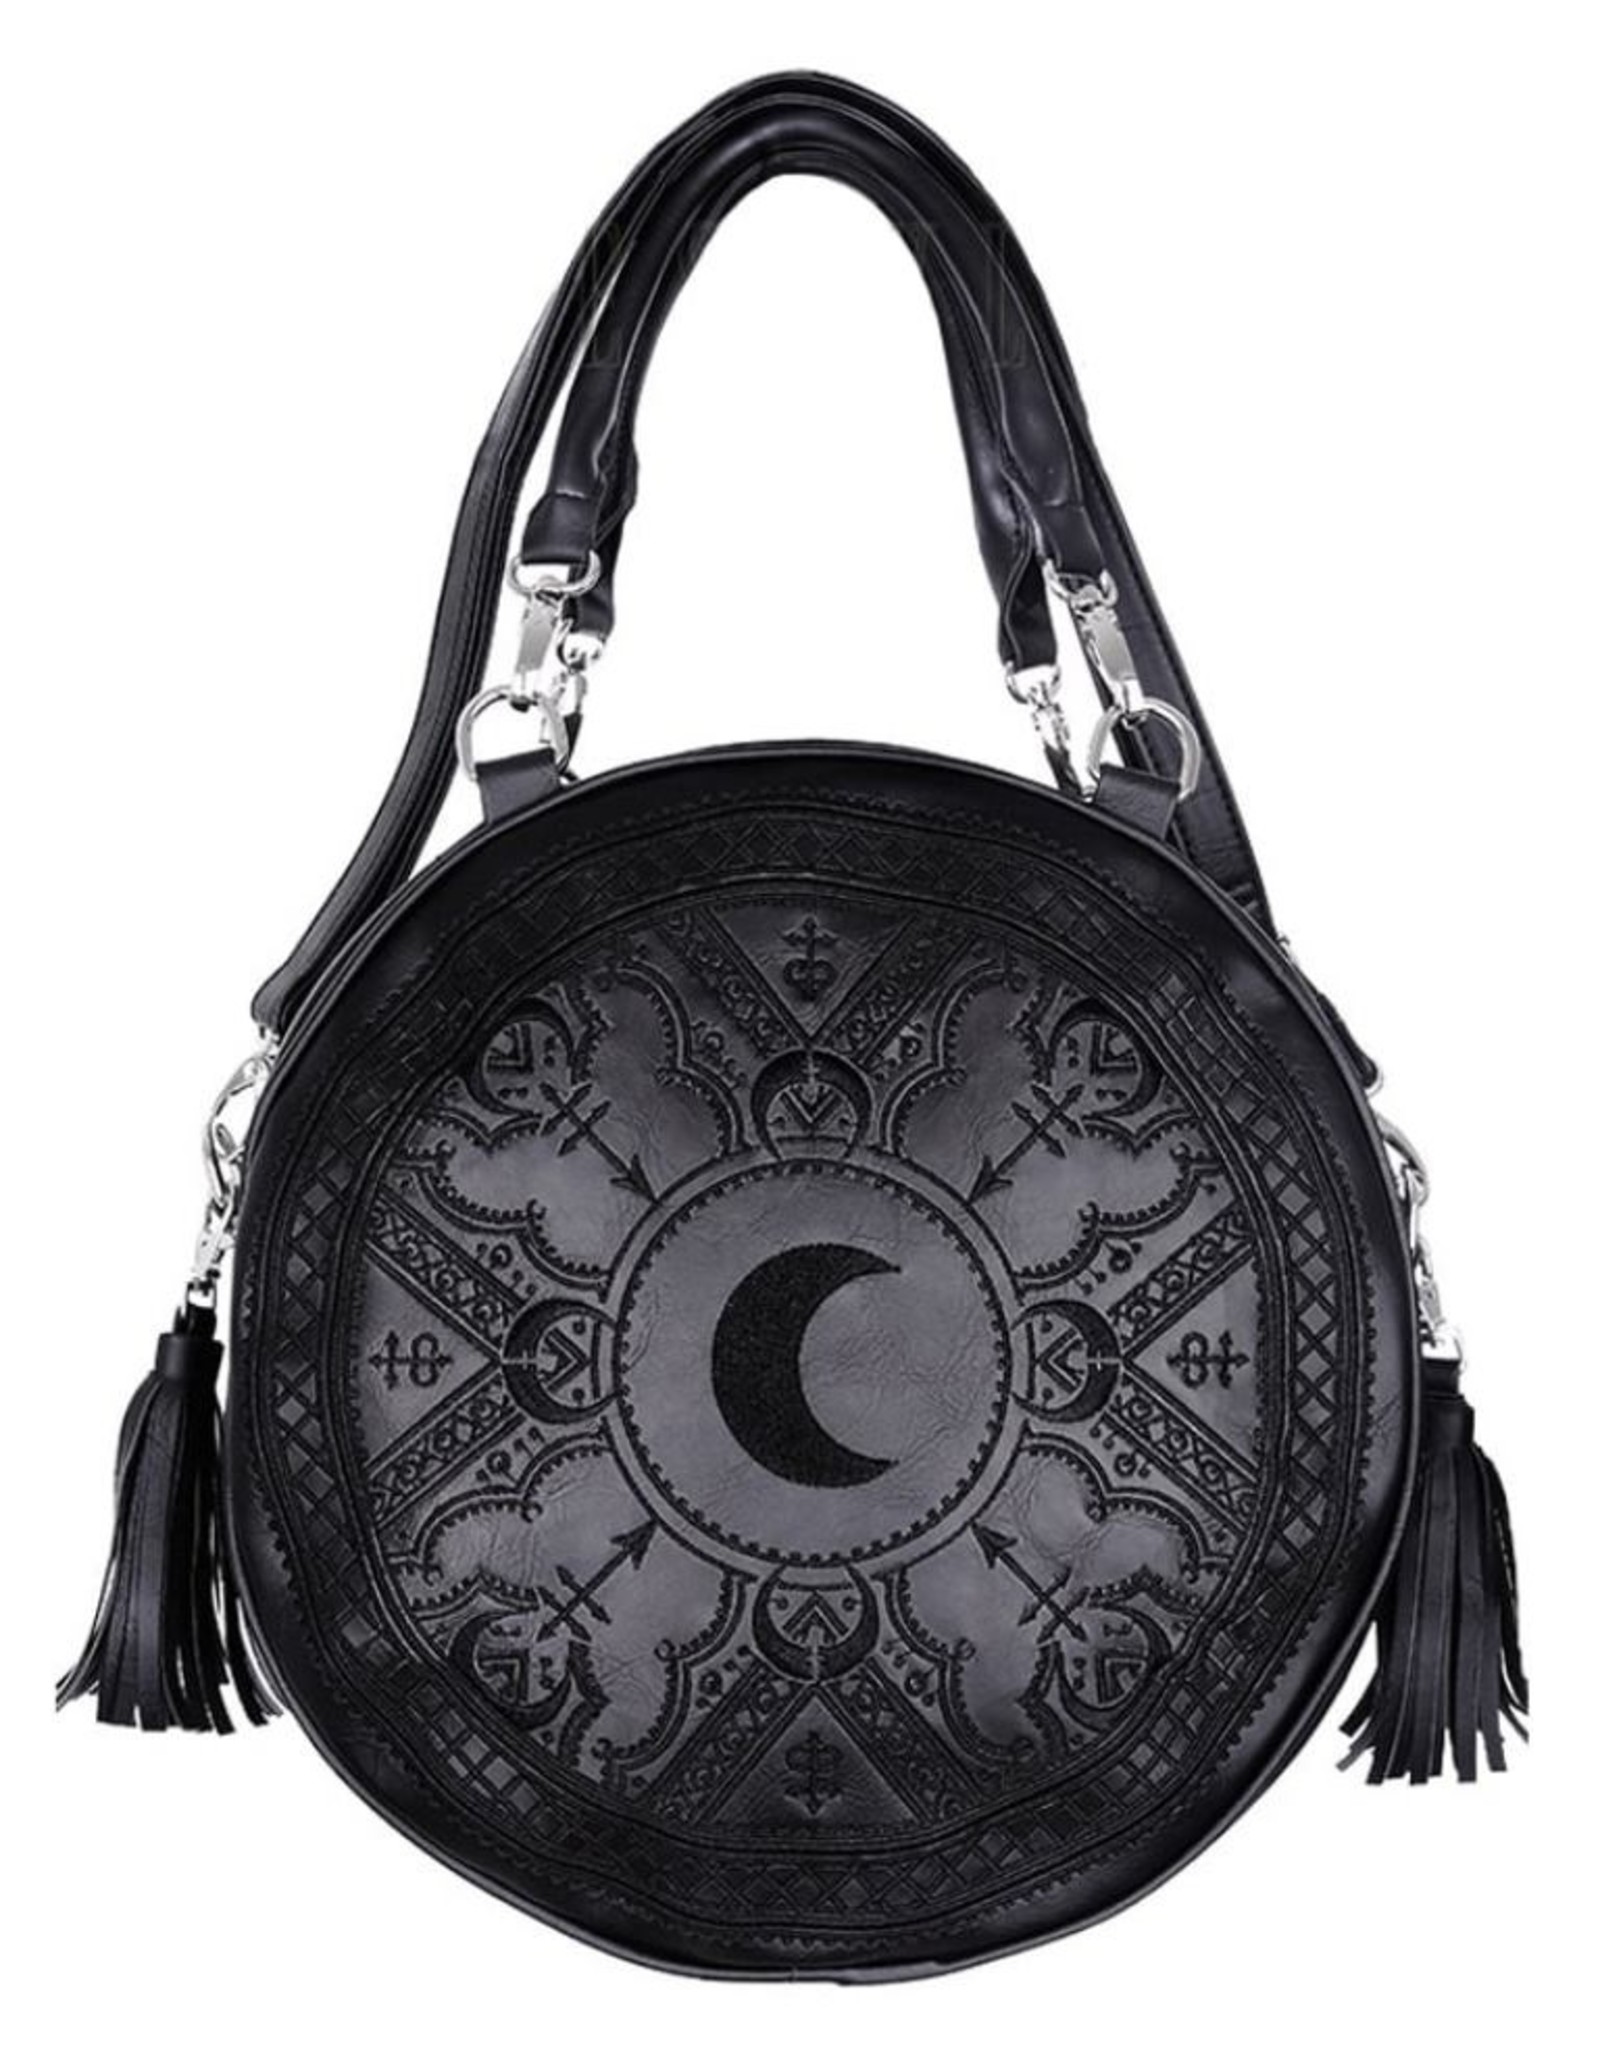 Restyle Gothic Bags Steampunk Bags - Gothic Henna Black Handbag with Moon Embroidery & Tassels